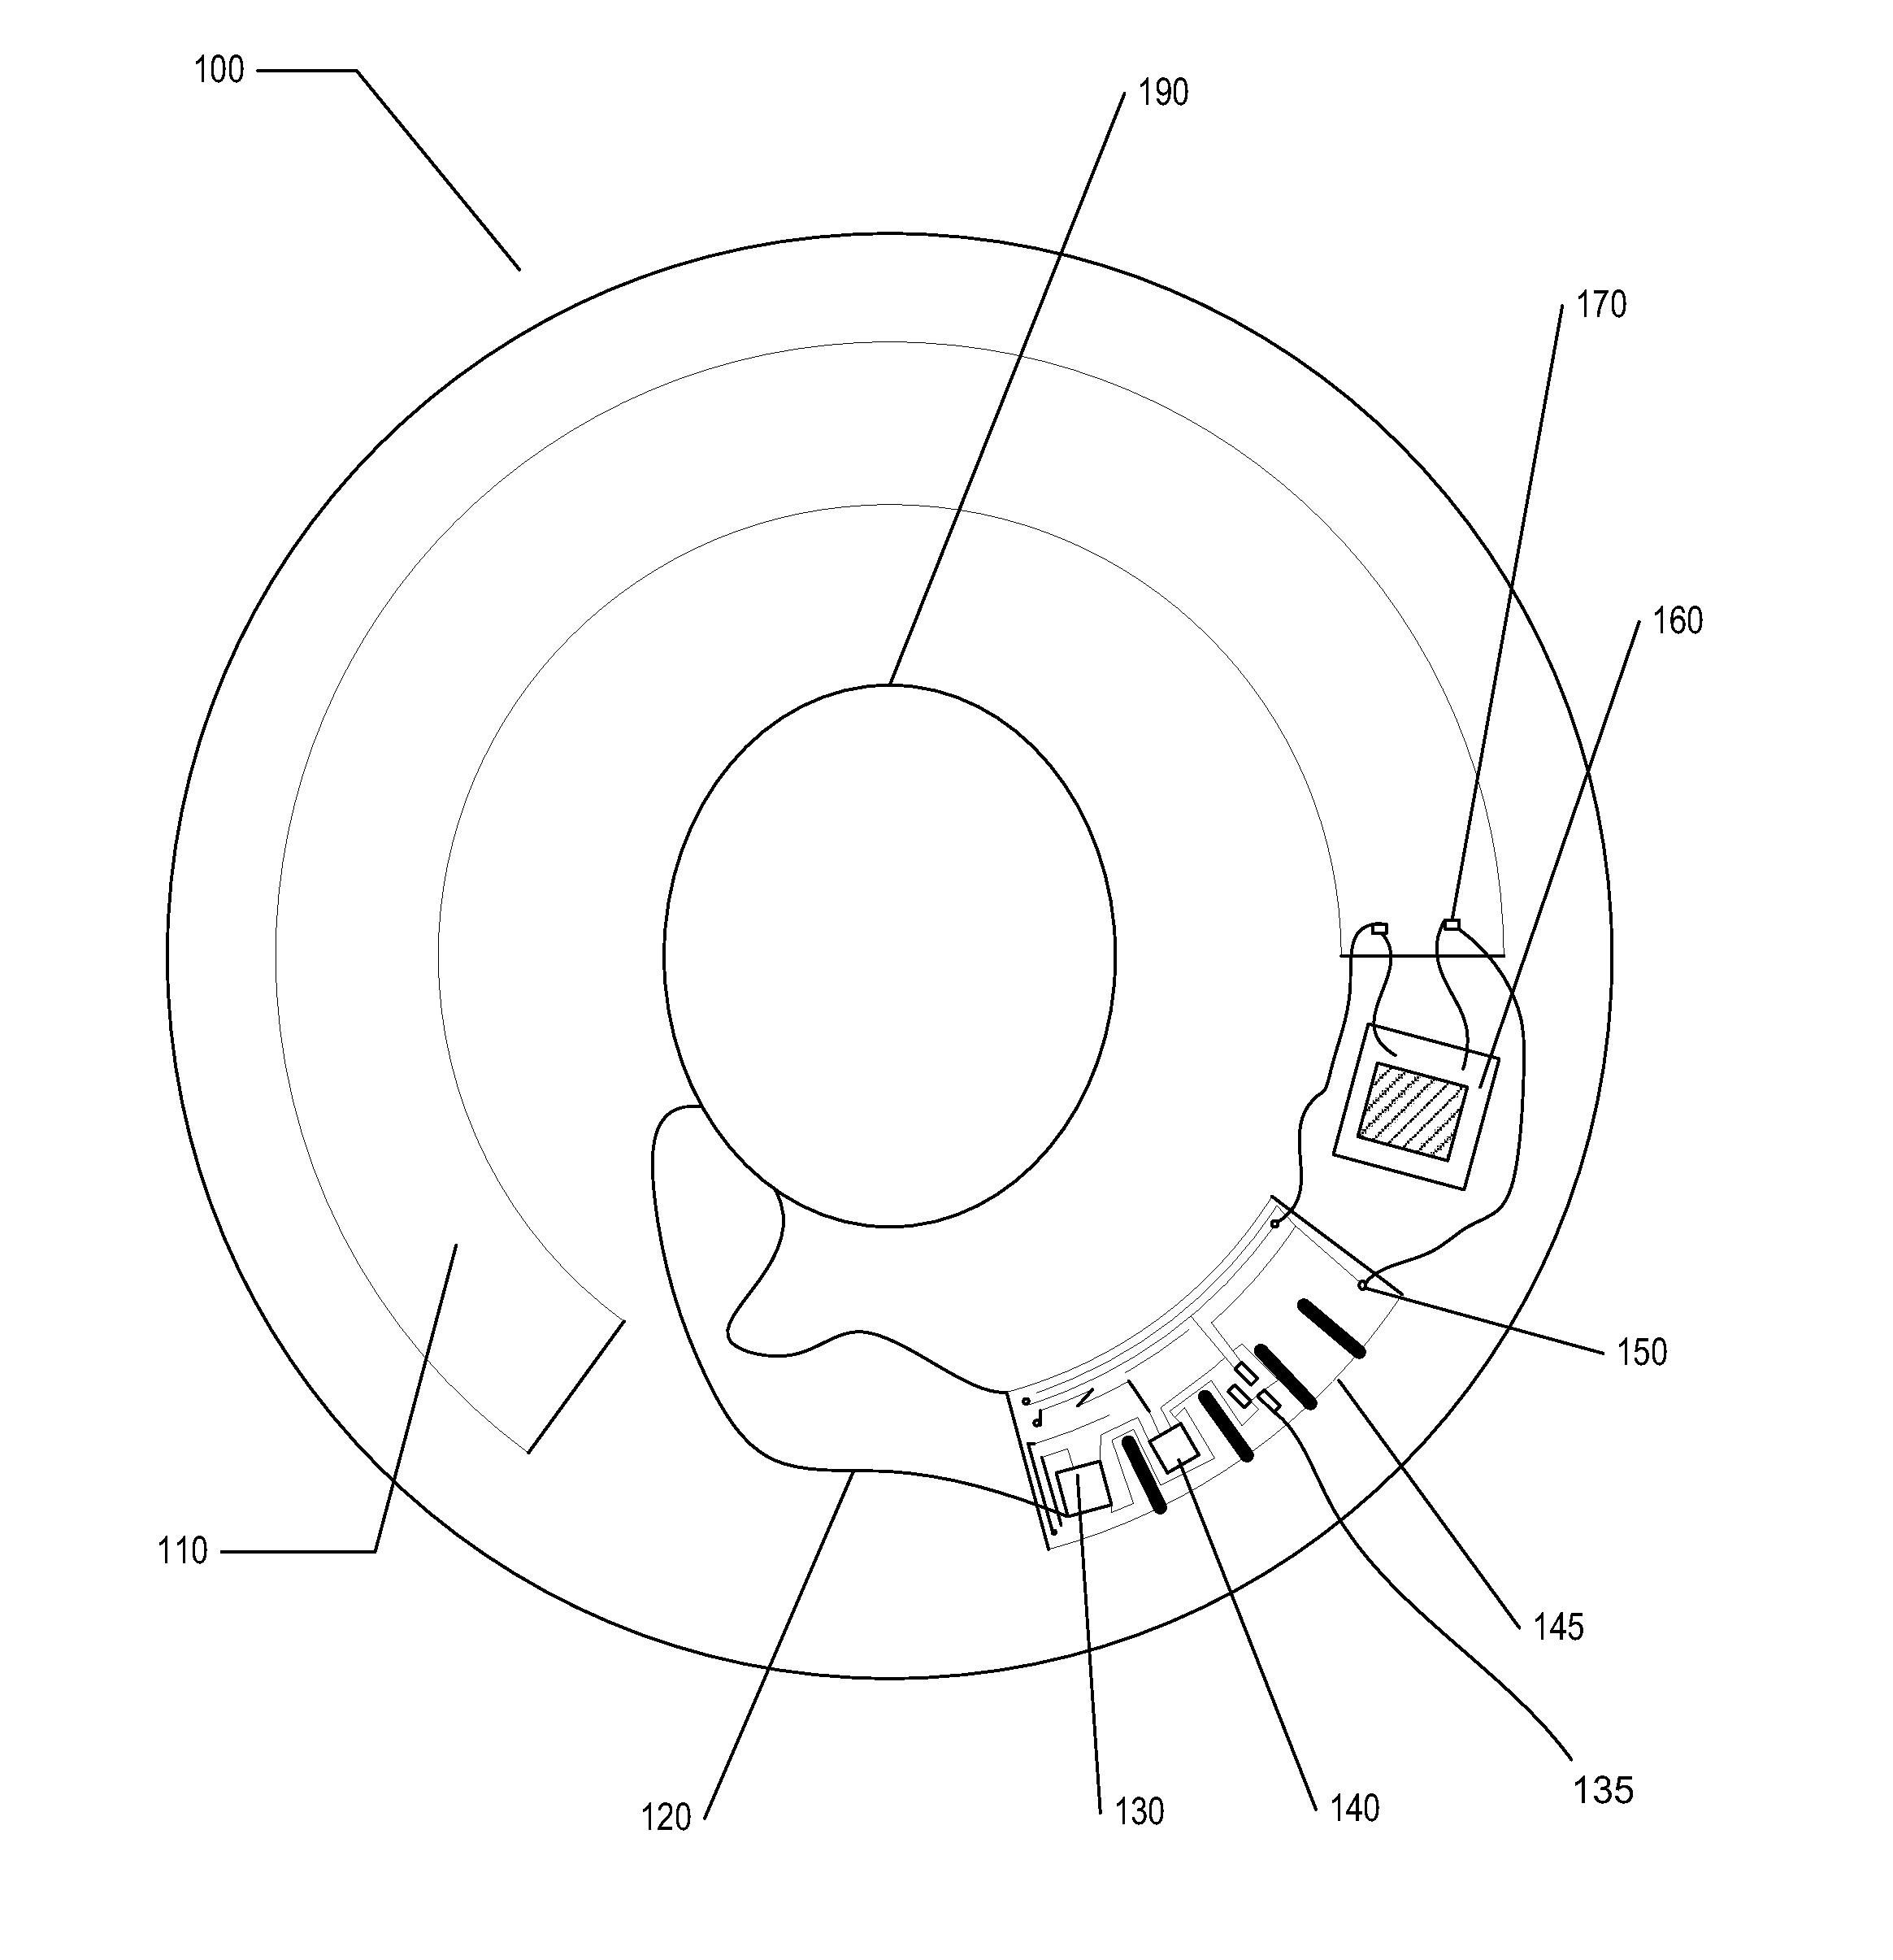 Apparatus and method for activation of components of an energized ophthalmic lens